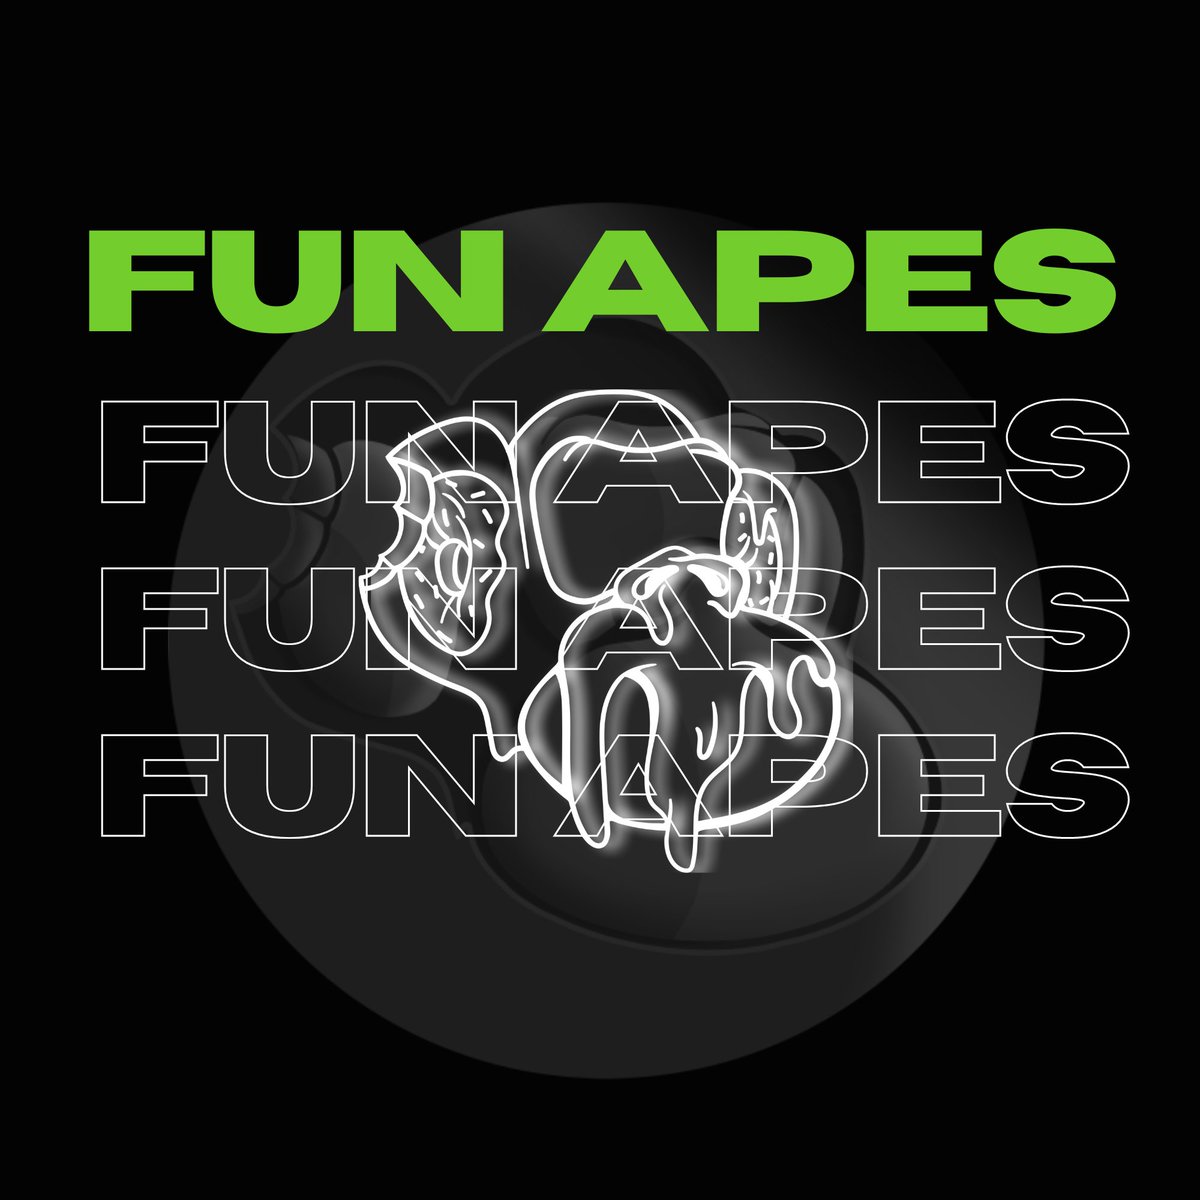 We've onboarded more wallets and real holders (1000+) to @apecoin than most projects via @Engagertool. To date, the @FunApes_NFT holders have been rewarded with 16,875 @apecoin for simply engaging🤝 If we go by a reserved average of let's say $5 per $APE, that's $84,375. This